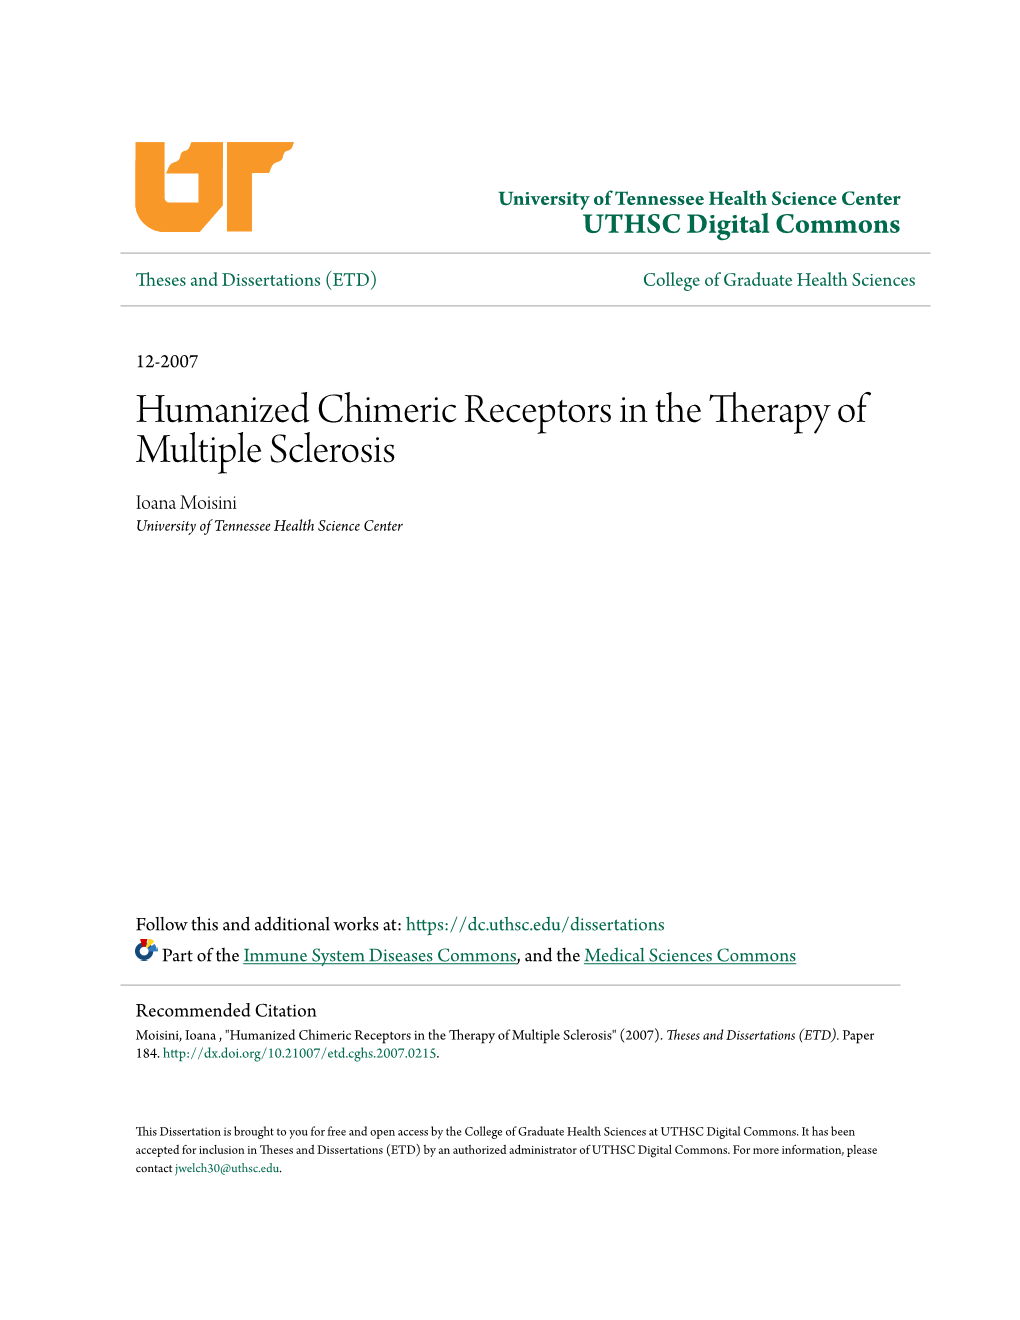 Humanized Chimeric Receptors in the Therapy of Multiple Sclerosis Ioana Moisini University of Tennessee Health Science Center